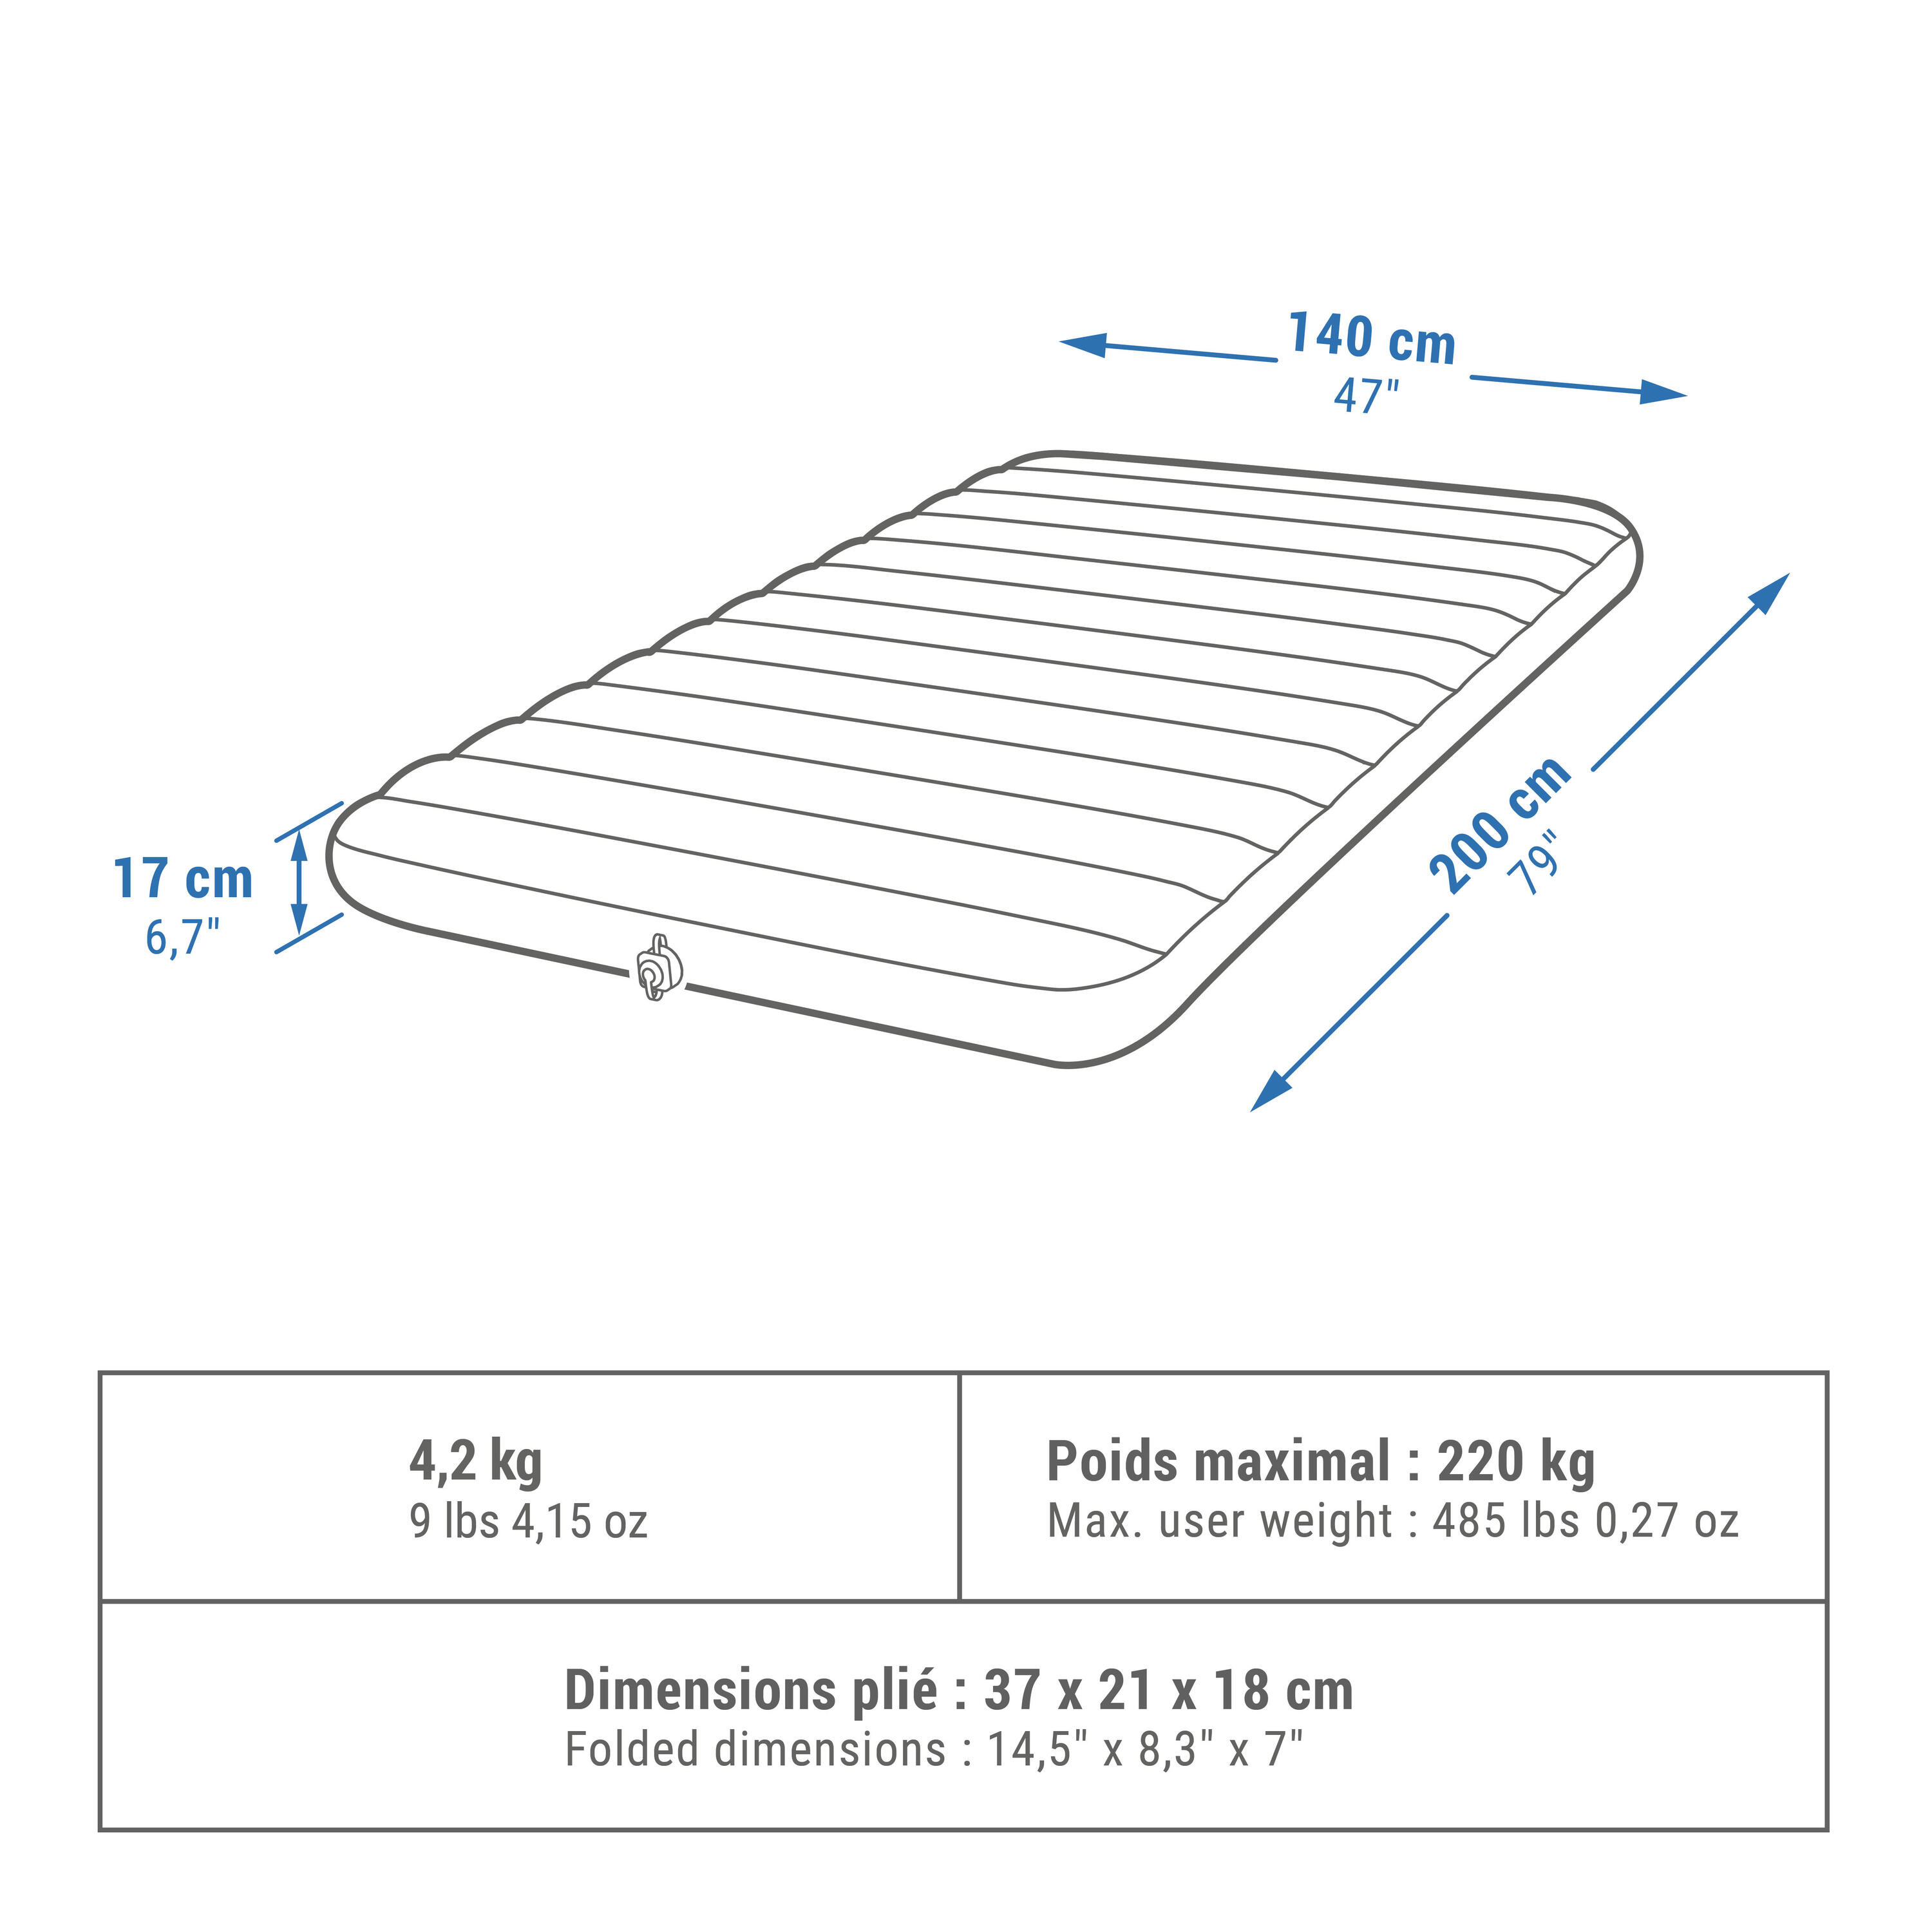 Inflatable Camping Mattress Air Comfort 140 cm 2 People 4/10